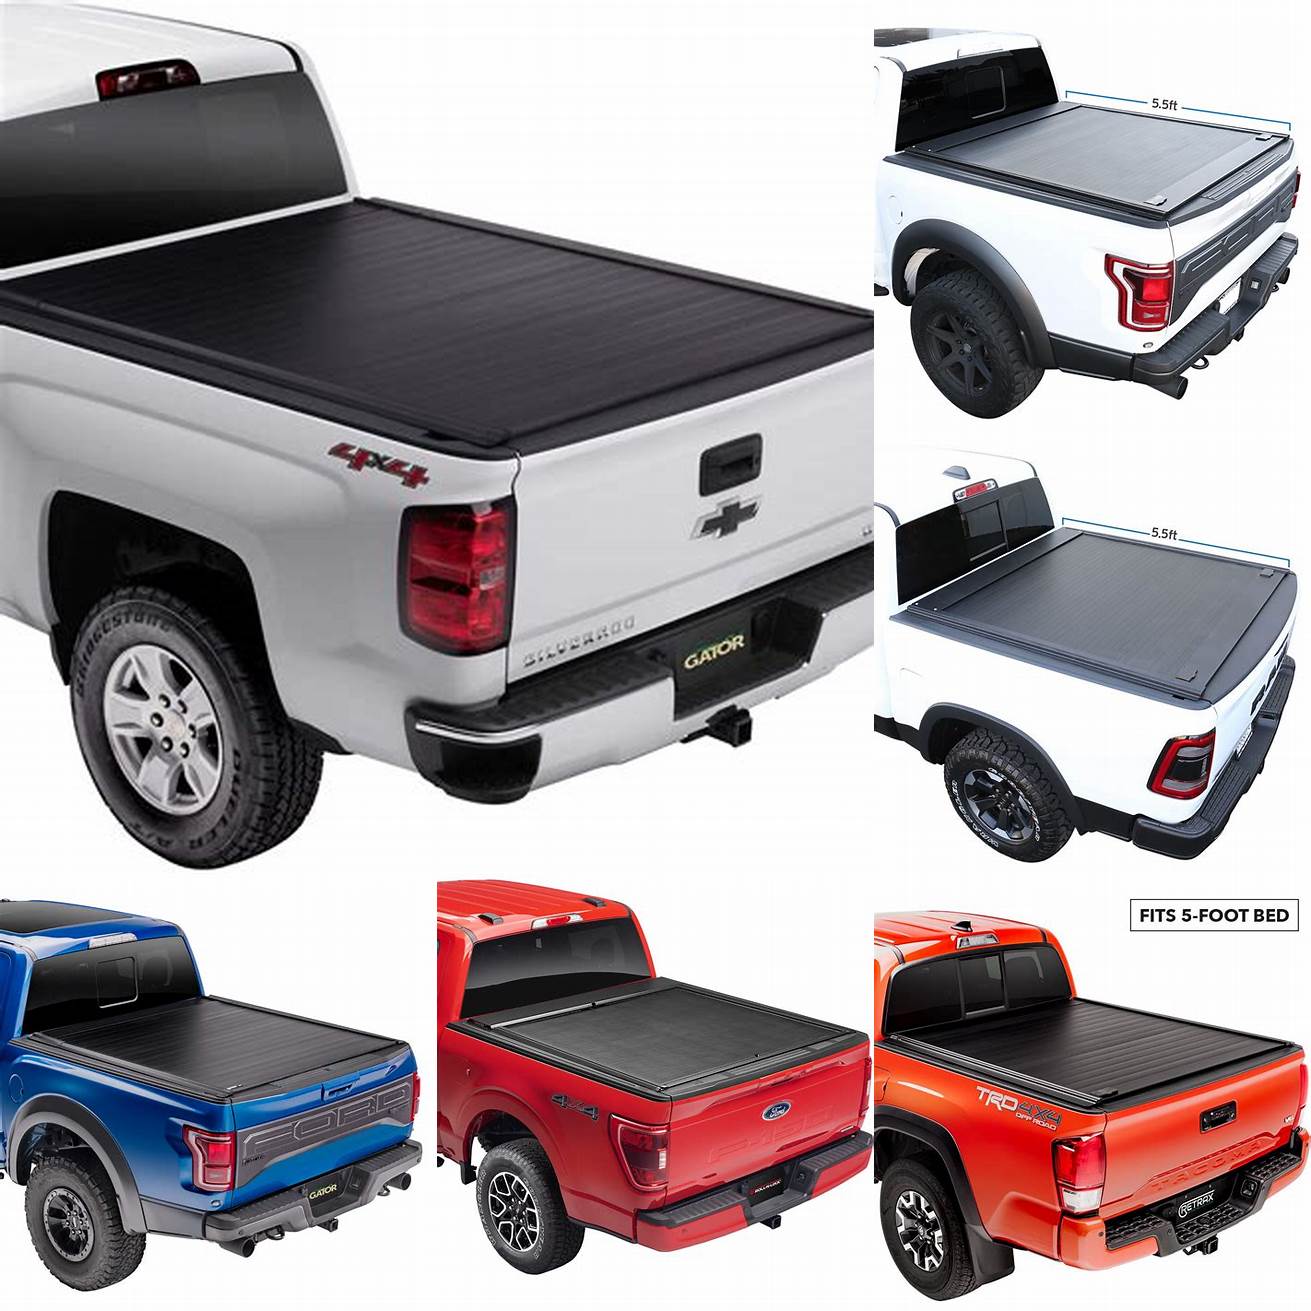 Durable Retractable bed covers are made of high-quality materials that can withstand the elements and protect your cargo from damage They are also resistant to scratches and dents making them a great investment for any truck owner